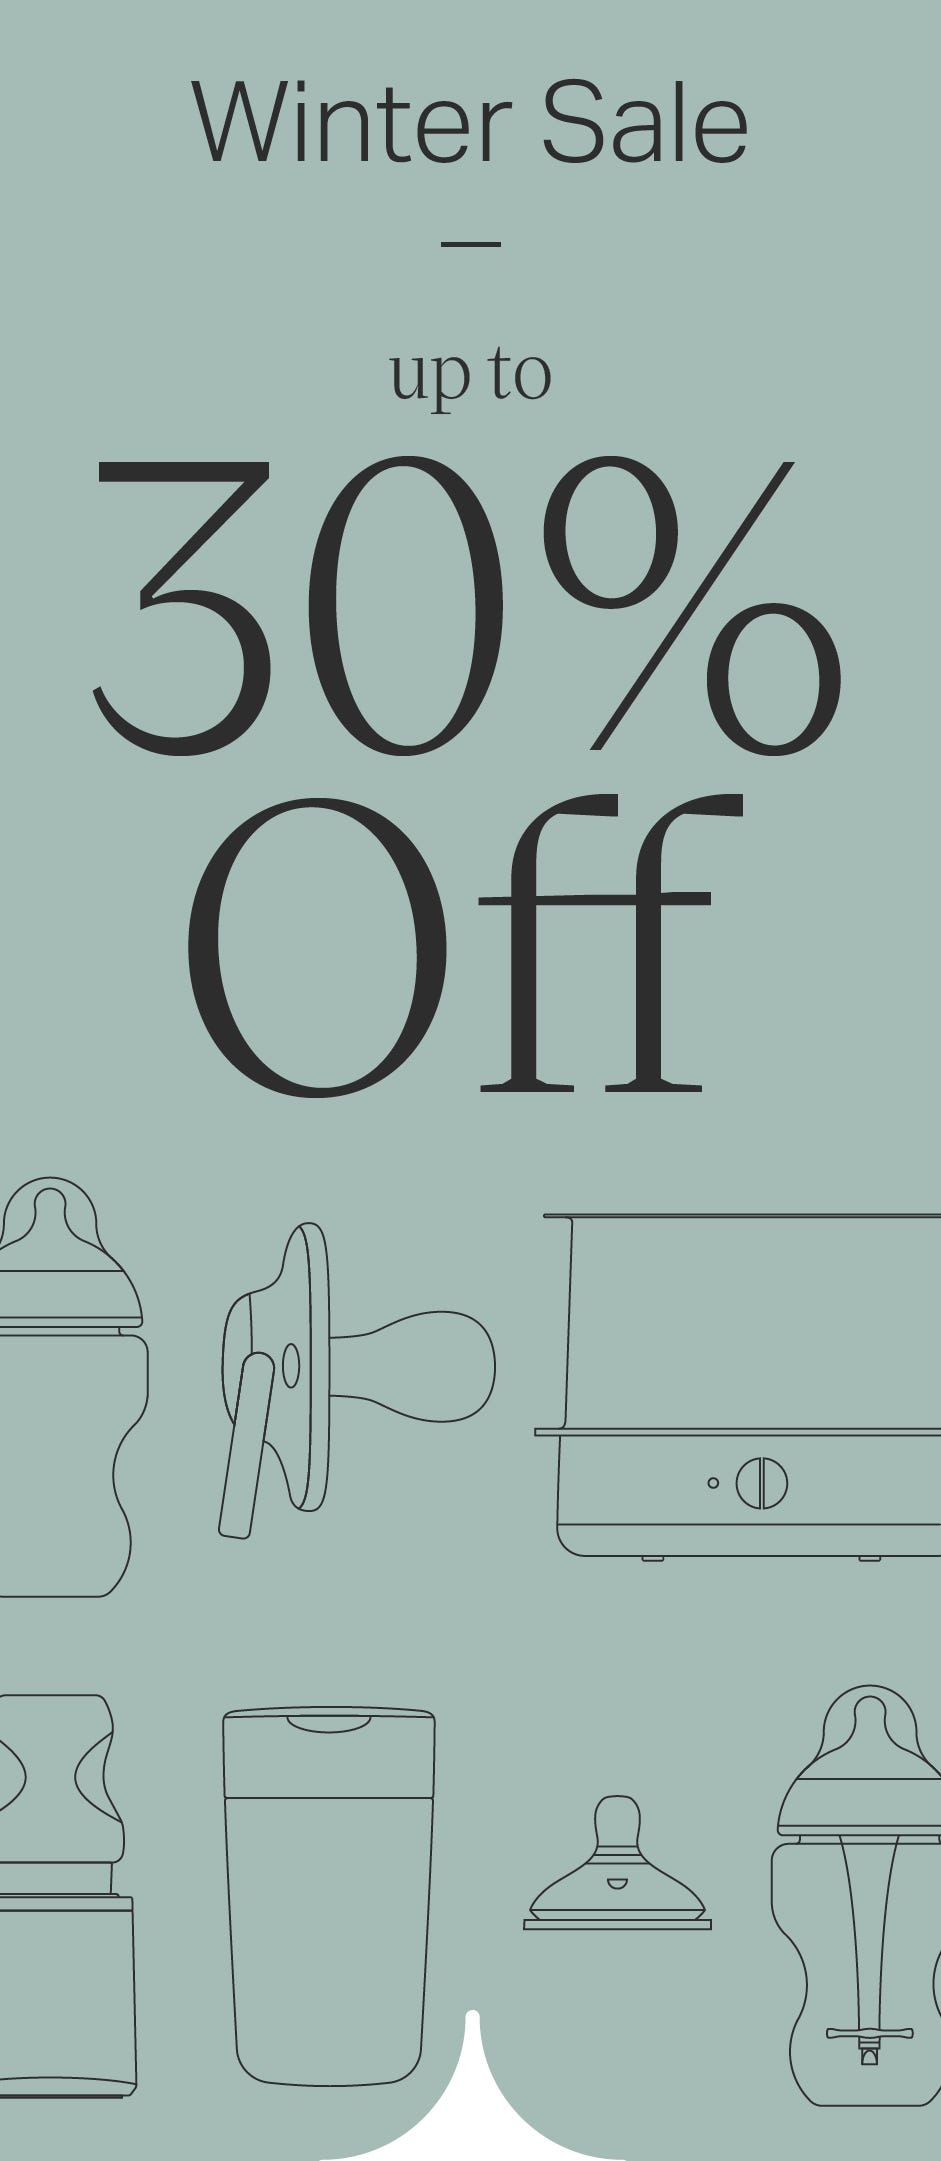 Winter Sale up to 30% Off